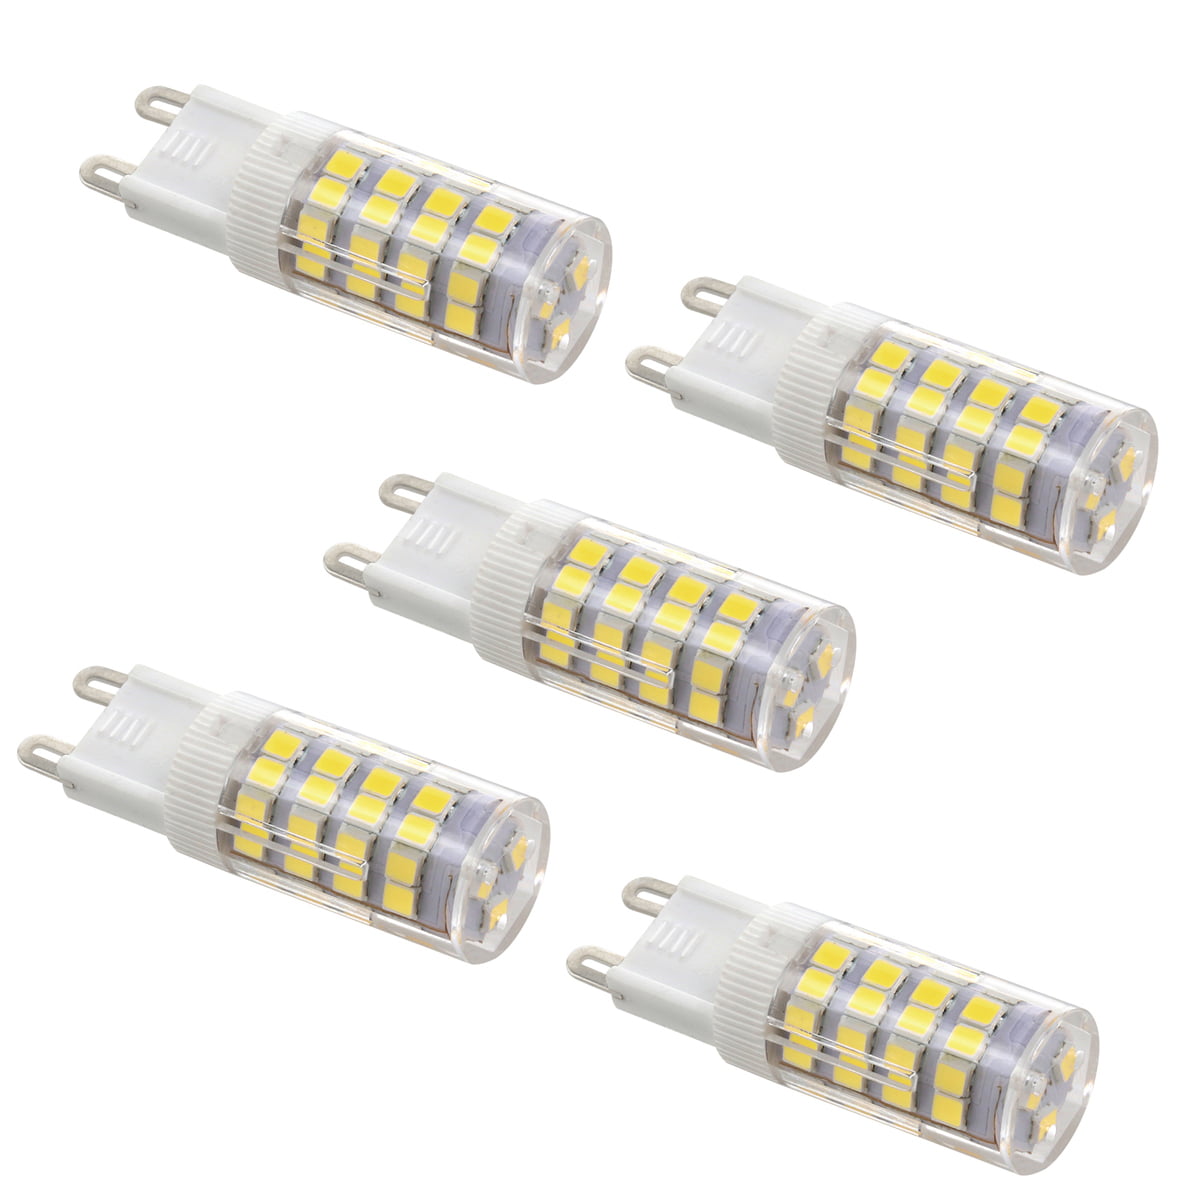 Lights Bulbs Light Source Color : Warm White, Voltage : 110V Dimmable 3W G9 LED Bulbs Lights T 14 SMD 2835 200 lm Warm White/Cool White 5 pcs 